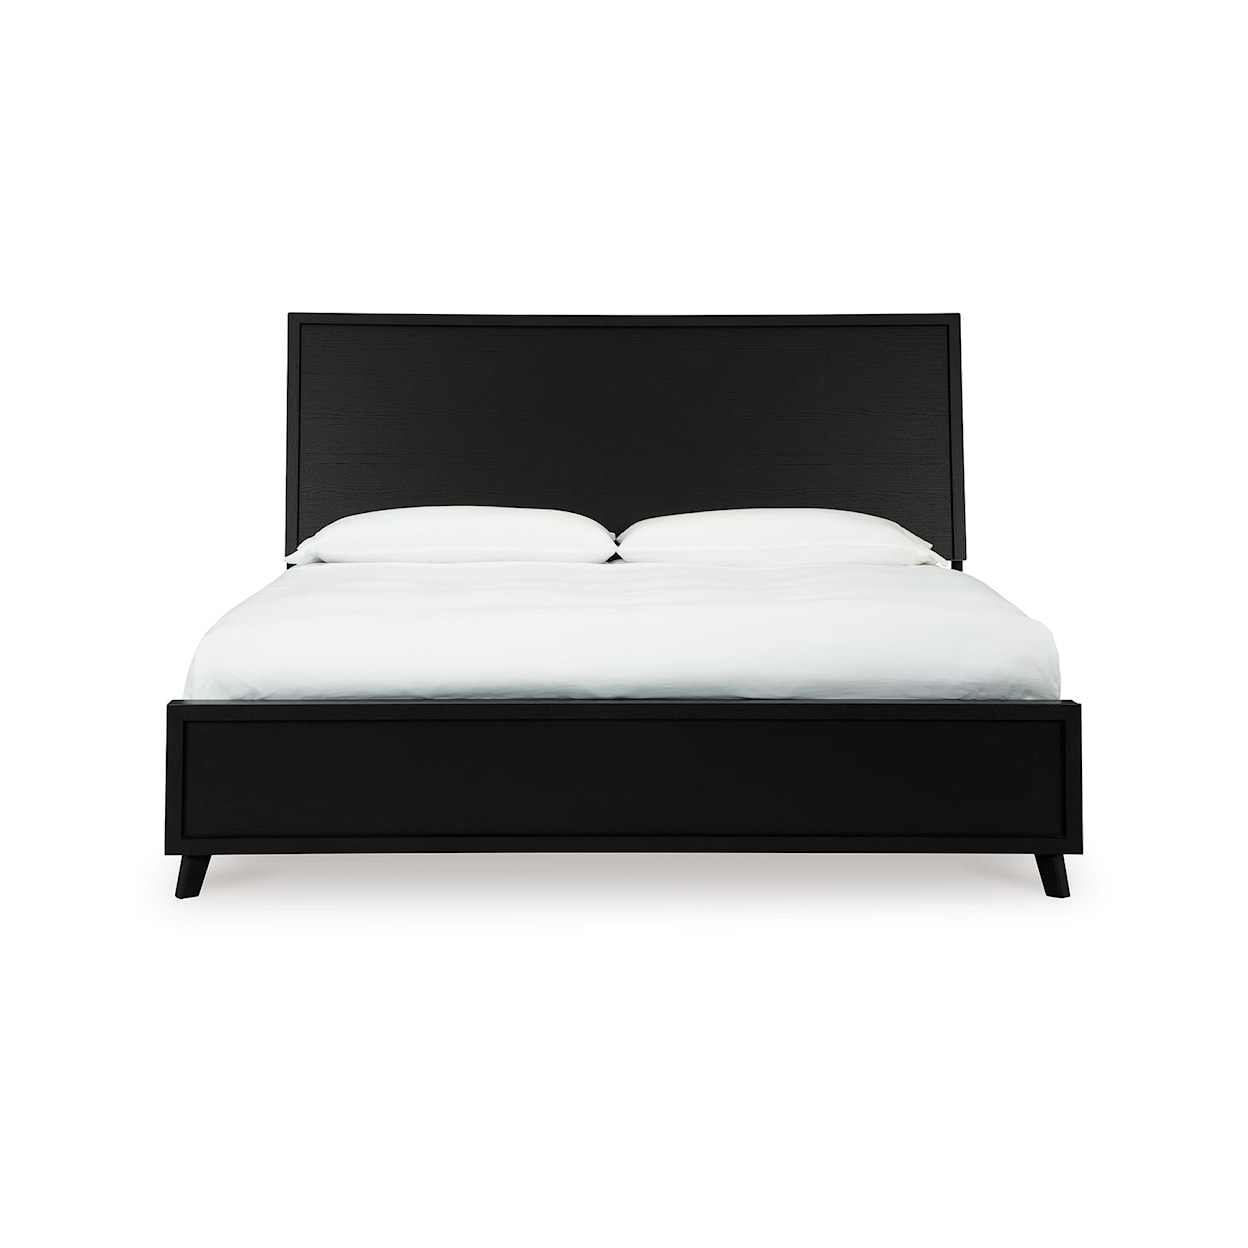 Signature Design by Ashley Danziar King Panel Bed